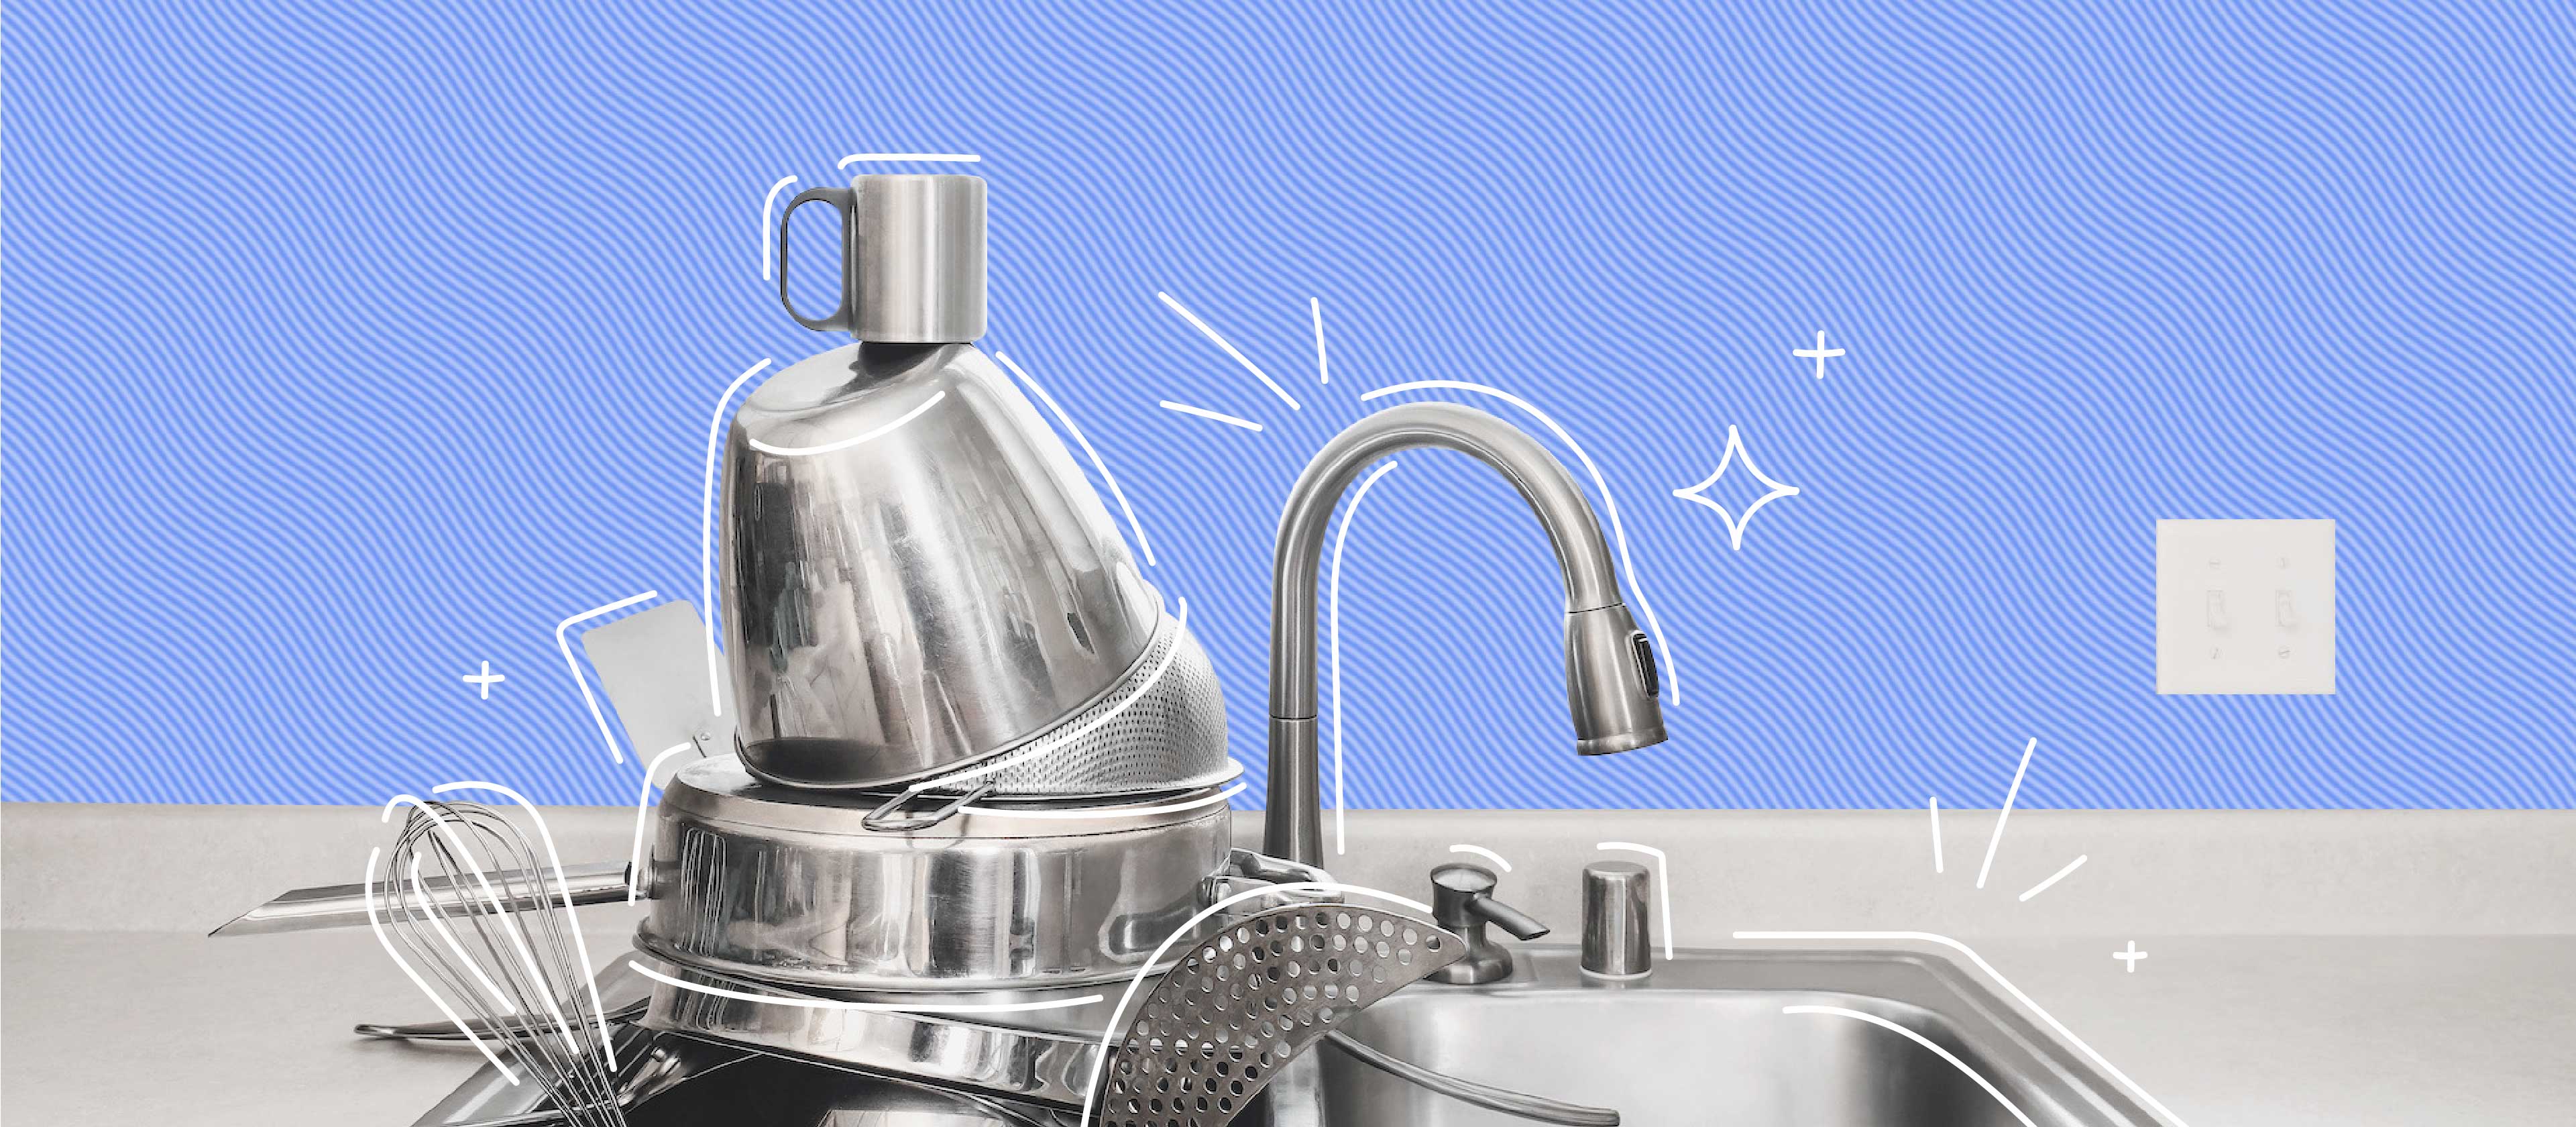 How to Clean Stainless-Steel Appliances and Kitchen Items the